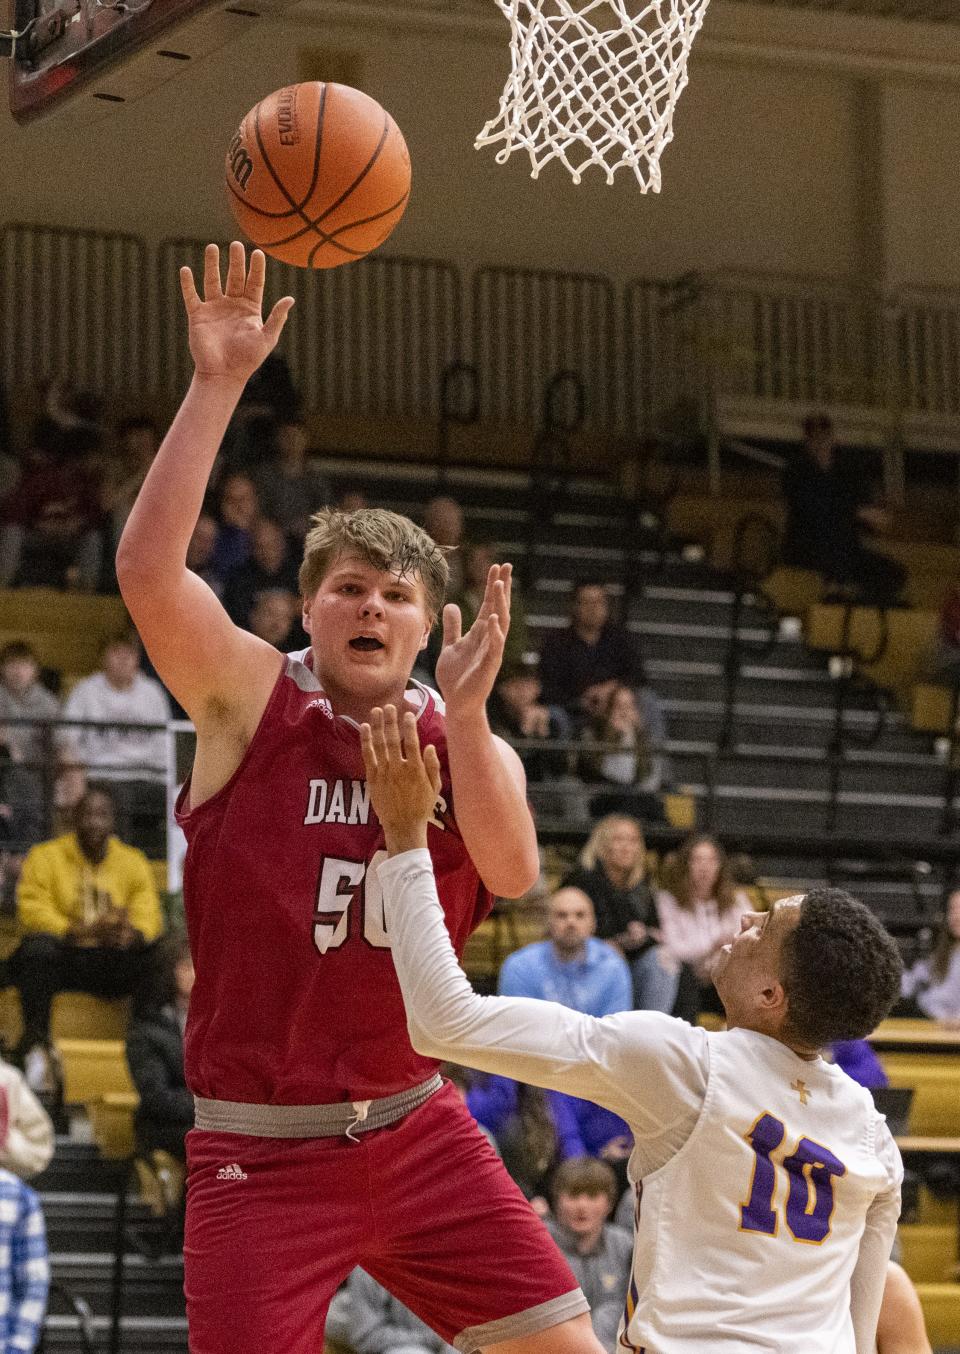 Danville High School junior Evan Lawrence (50) looses control of his shot during the first half of an IHSAA Class 3A Regional championship game against Guerin Catholic High School, Saturday, March 11, 2023, at Lebanon High School.